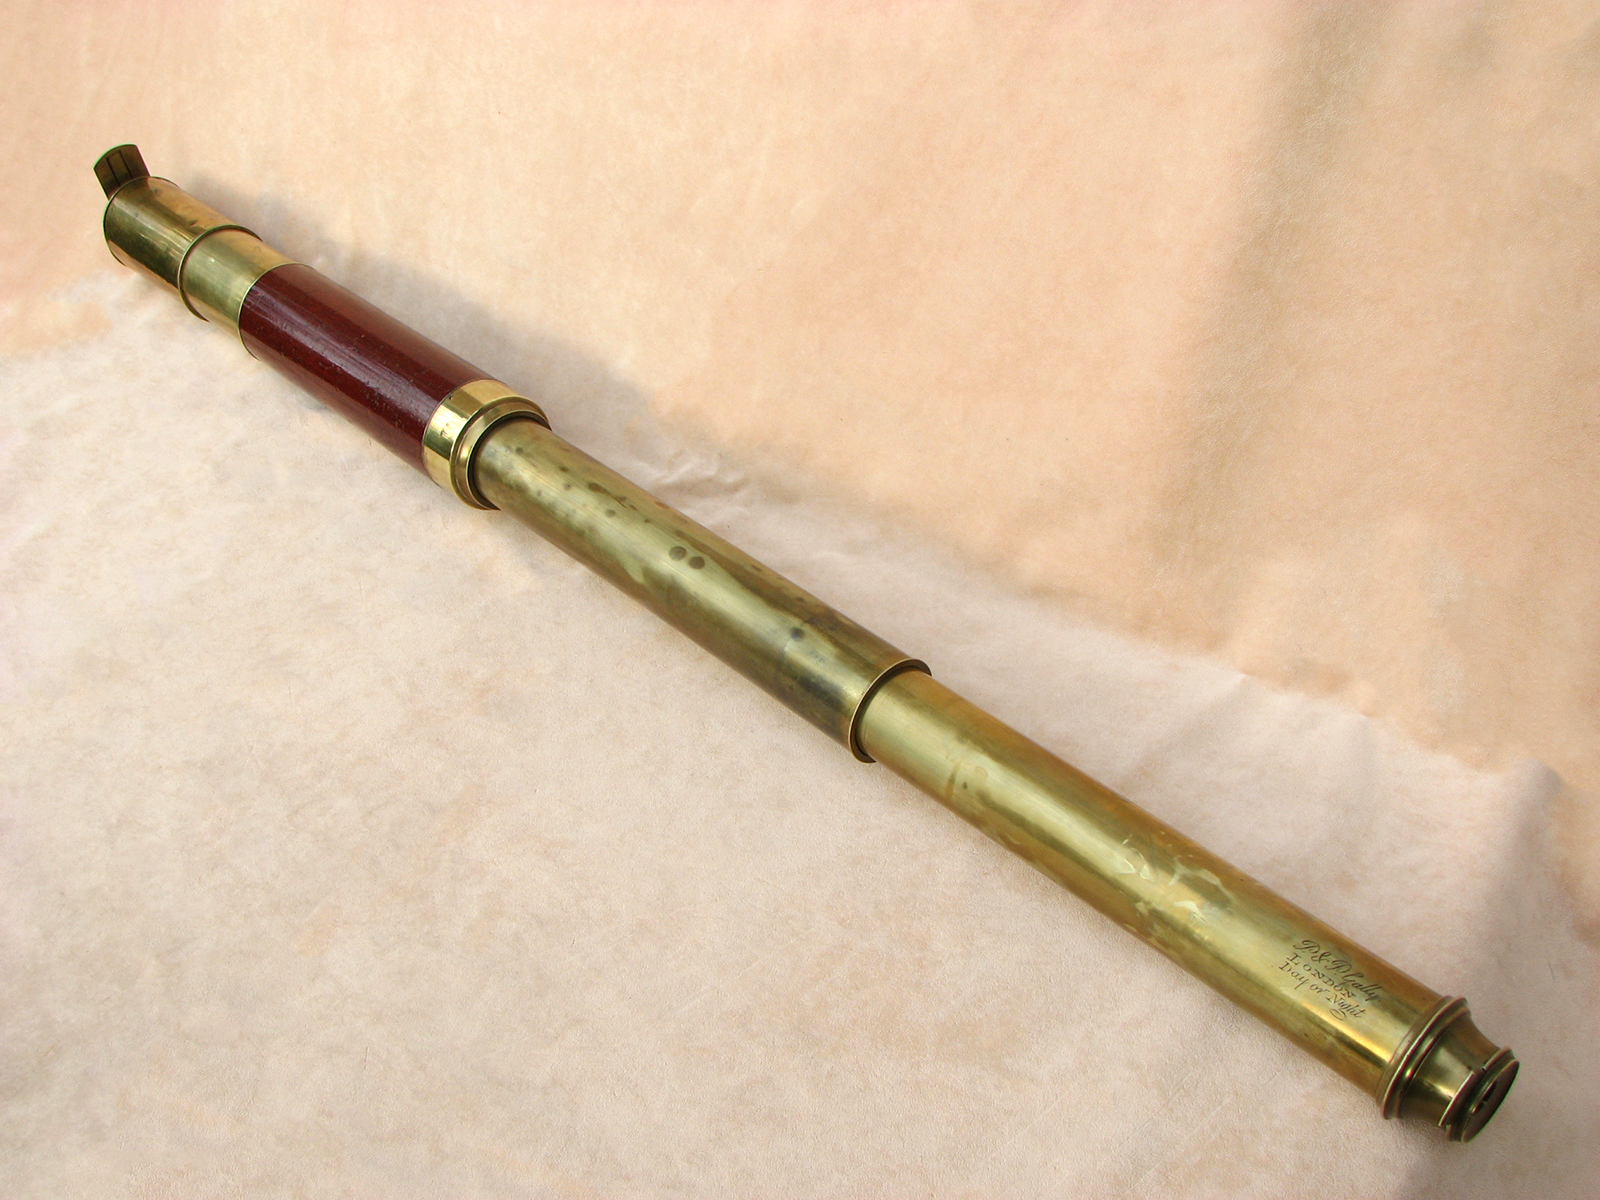 Early 19th century 2 draw Naval telescope signed P & P Gally, London